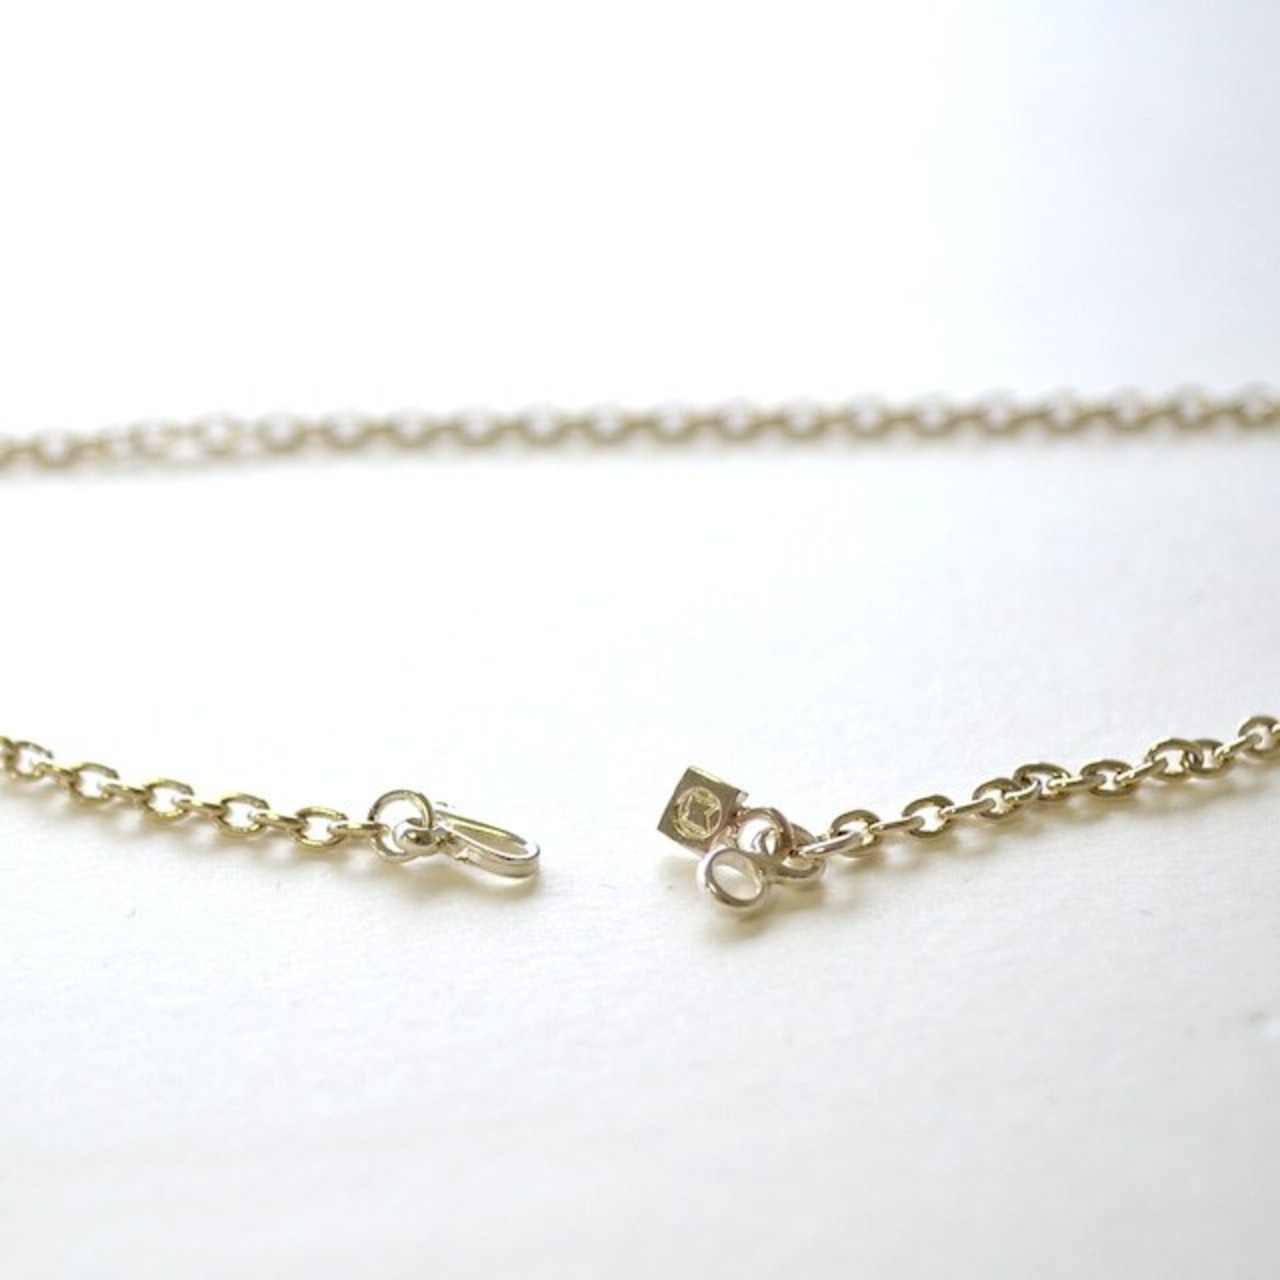 Oval Link Chain Necklace (L) (45cm)